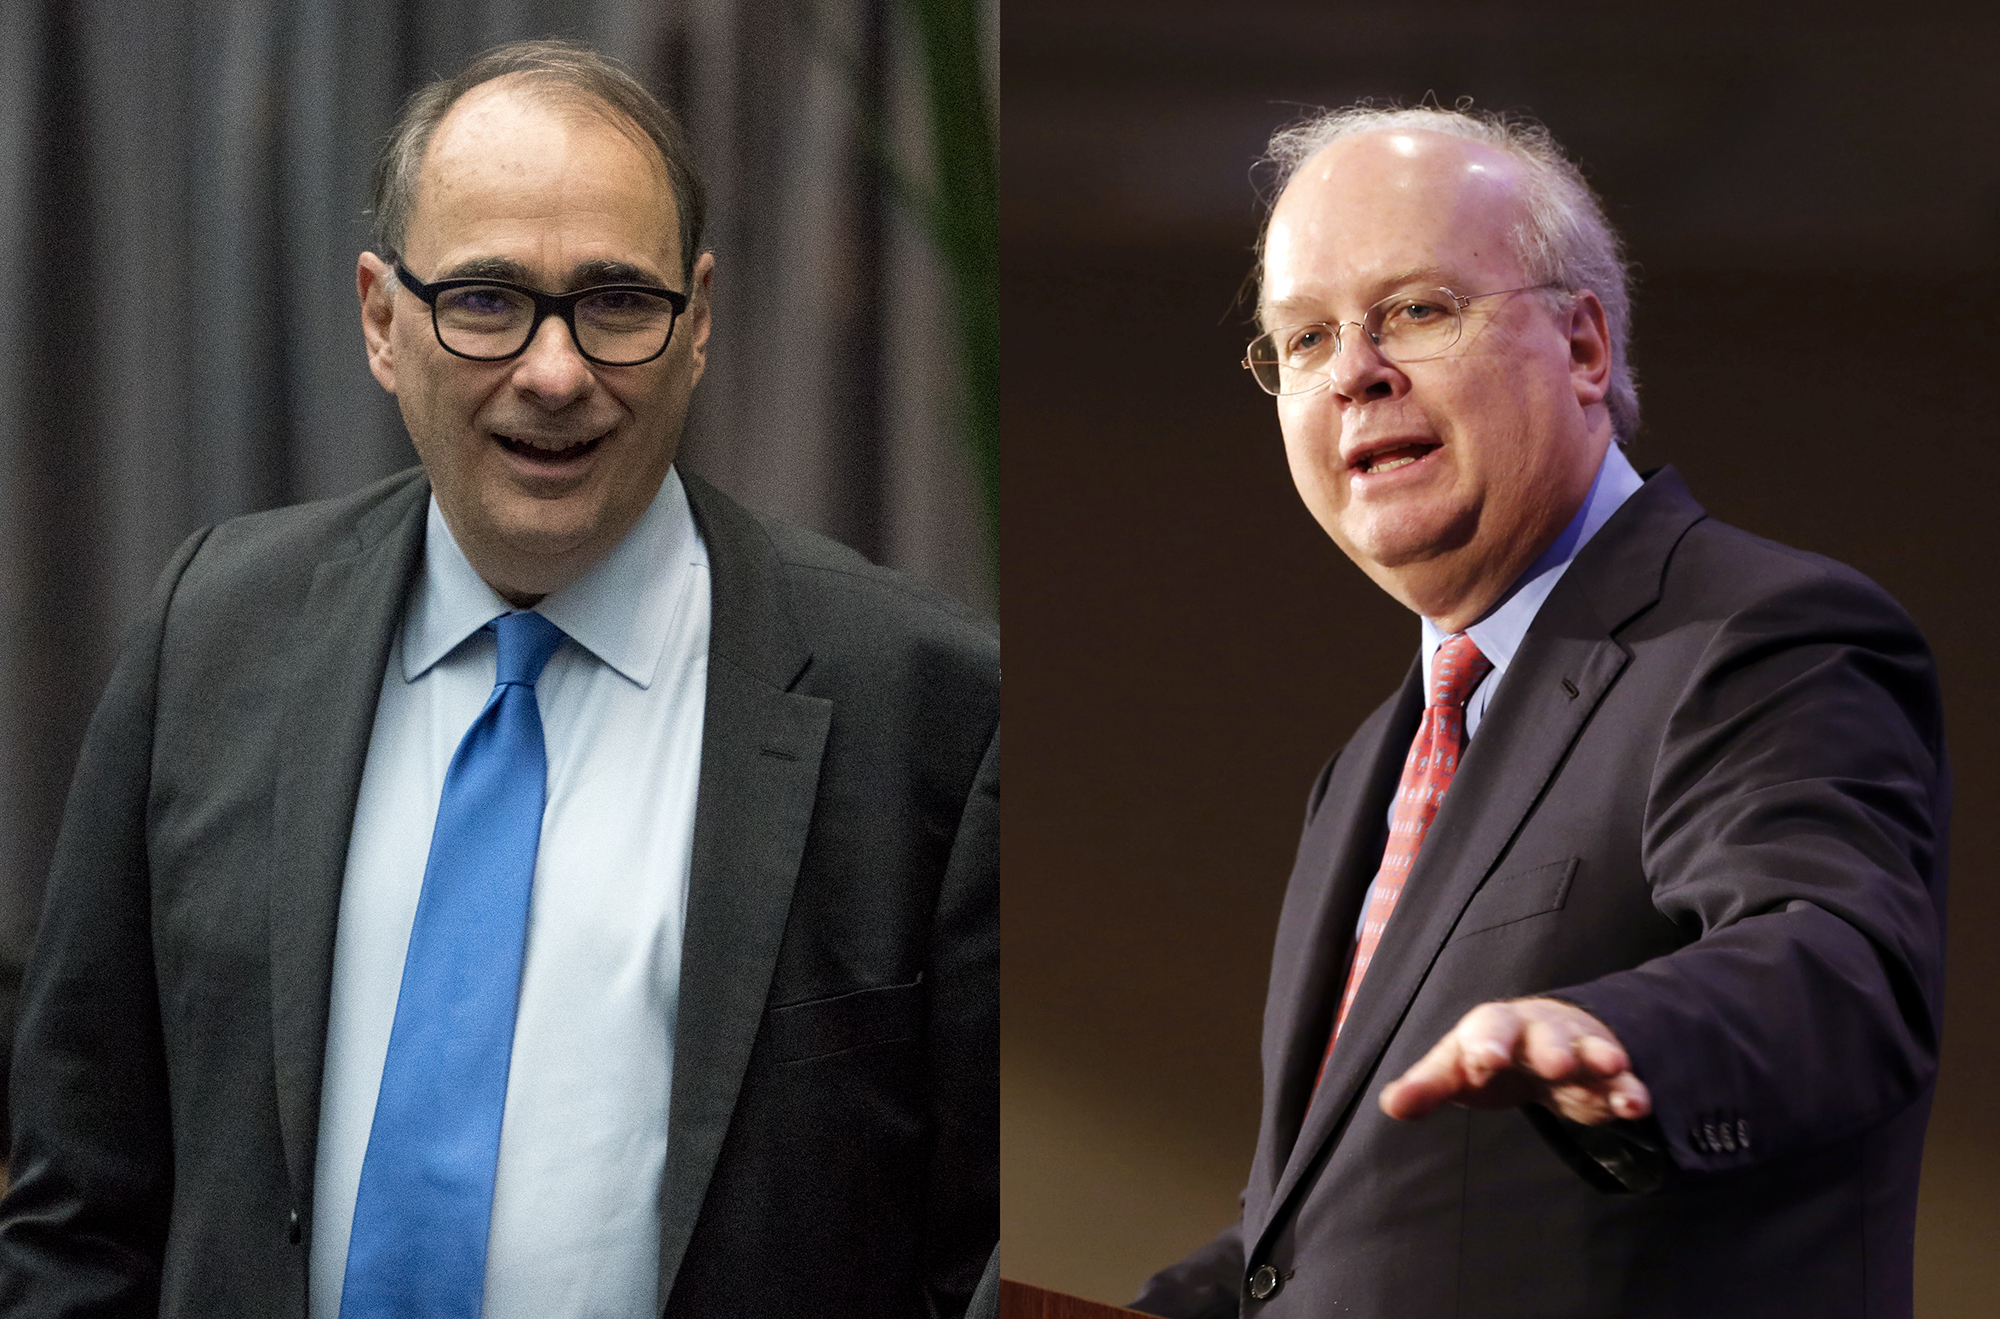 Karl Rove, David Axelrod Visit UW-Green Bay With ‘Point/Counterpoint’